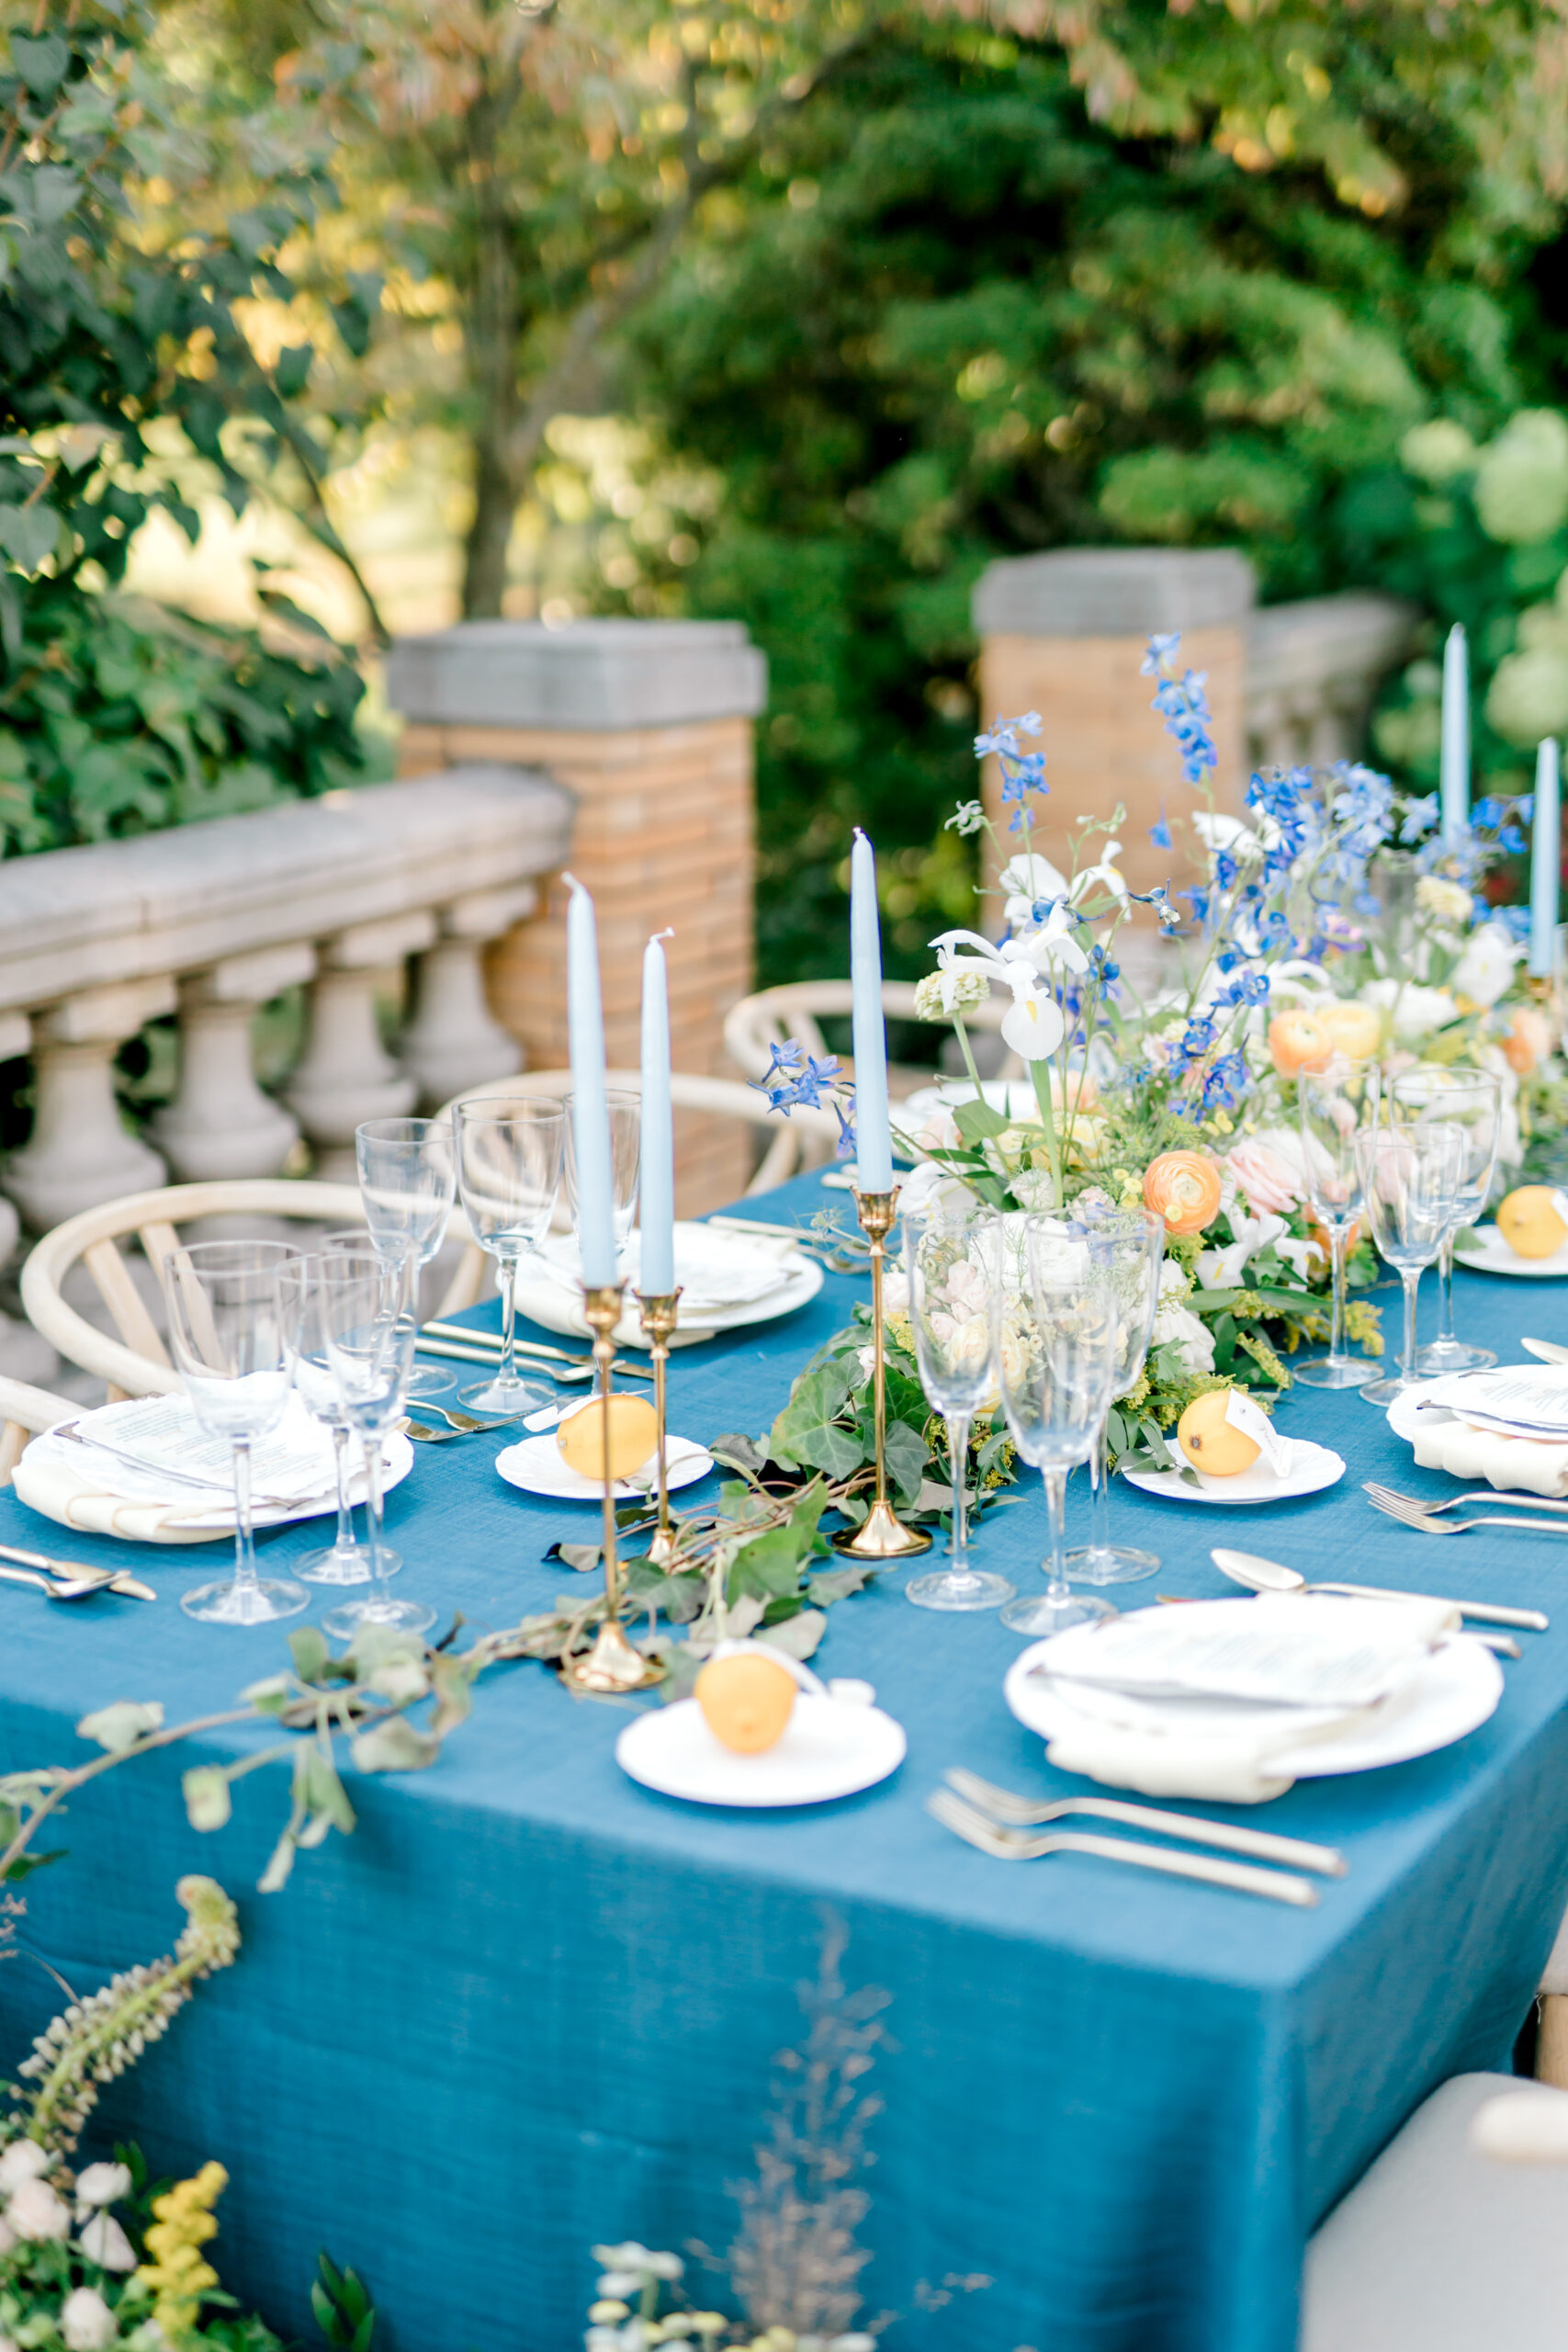 table scape with blue table cloth lemons and wildflowers